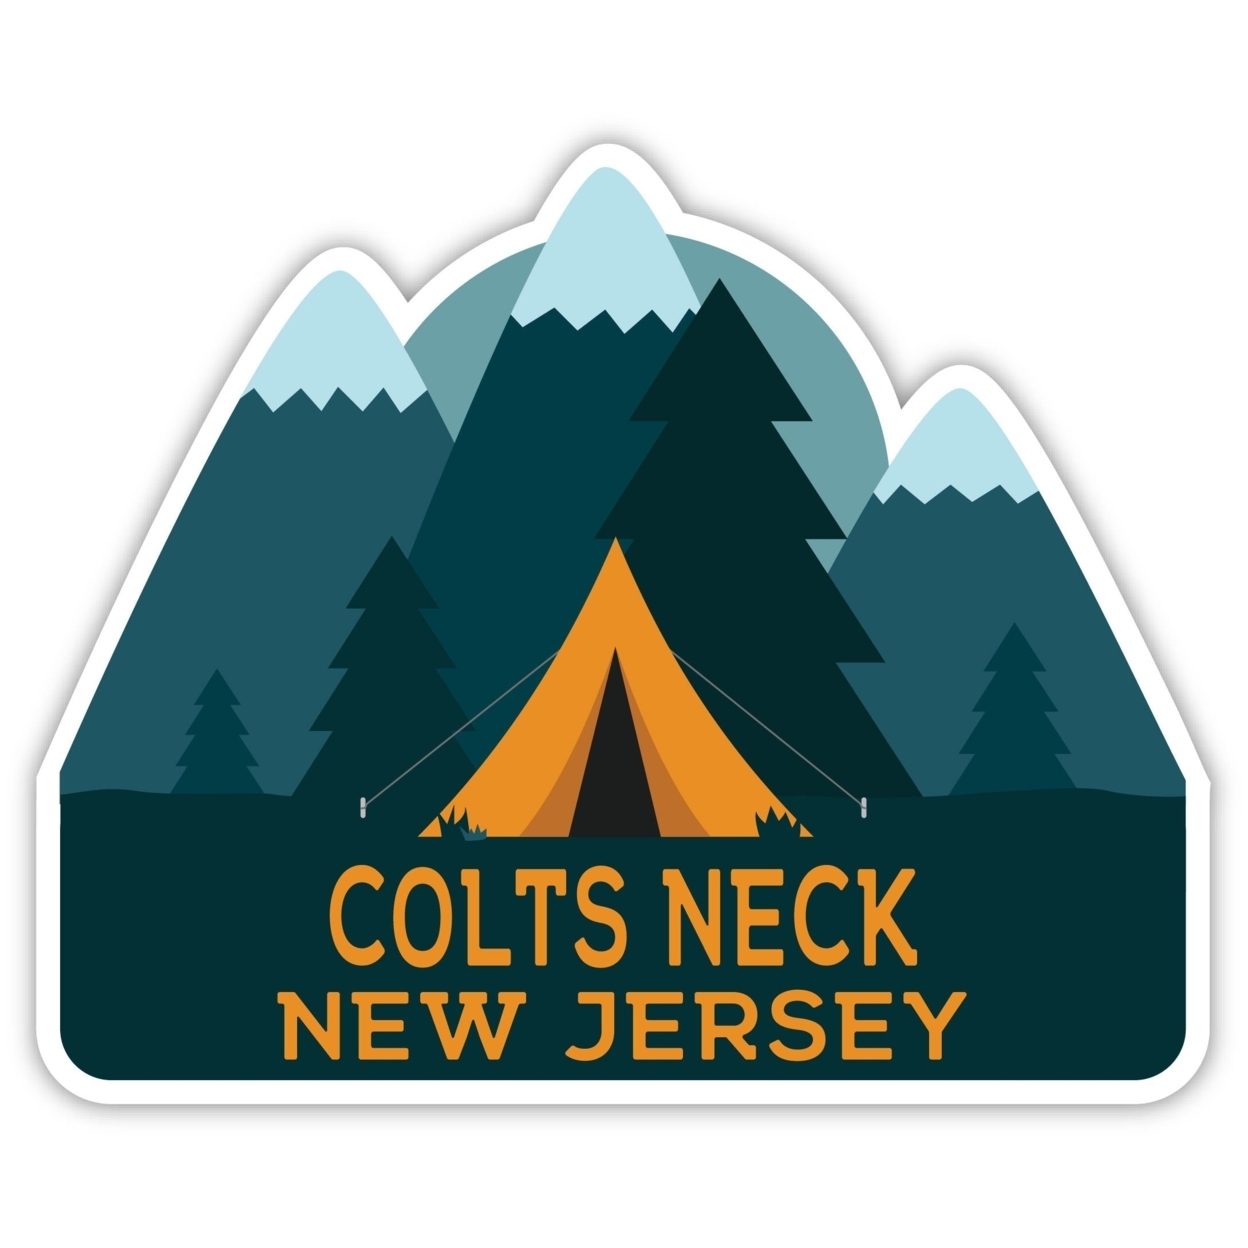 Colts Neck New Jersey Souvenir Decorative Stickers (Choose Theme And Size) - 4-Pack, 10-Inch, Tent